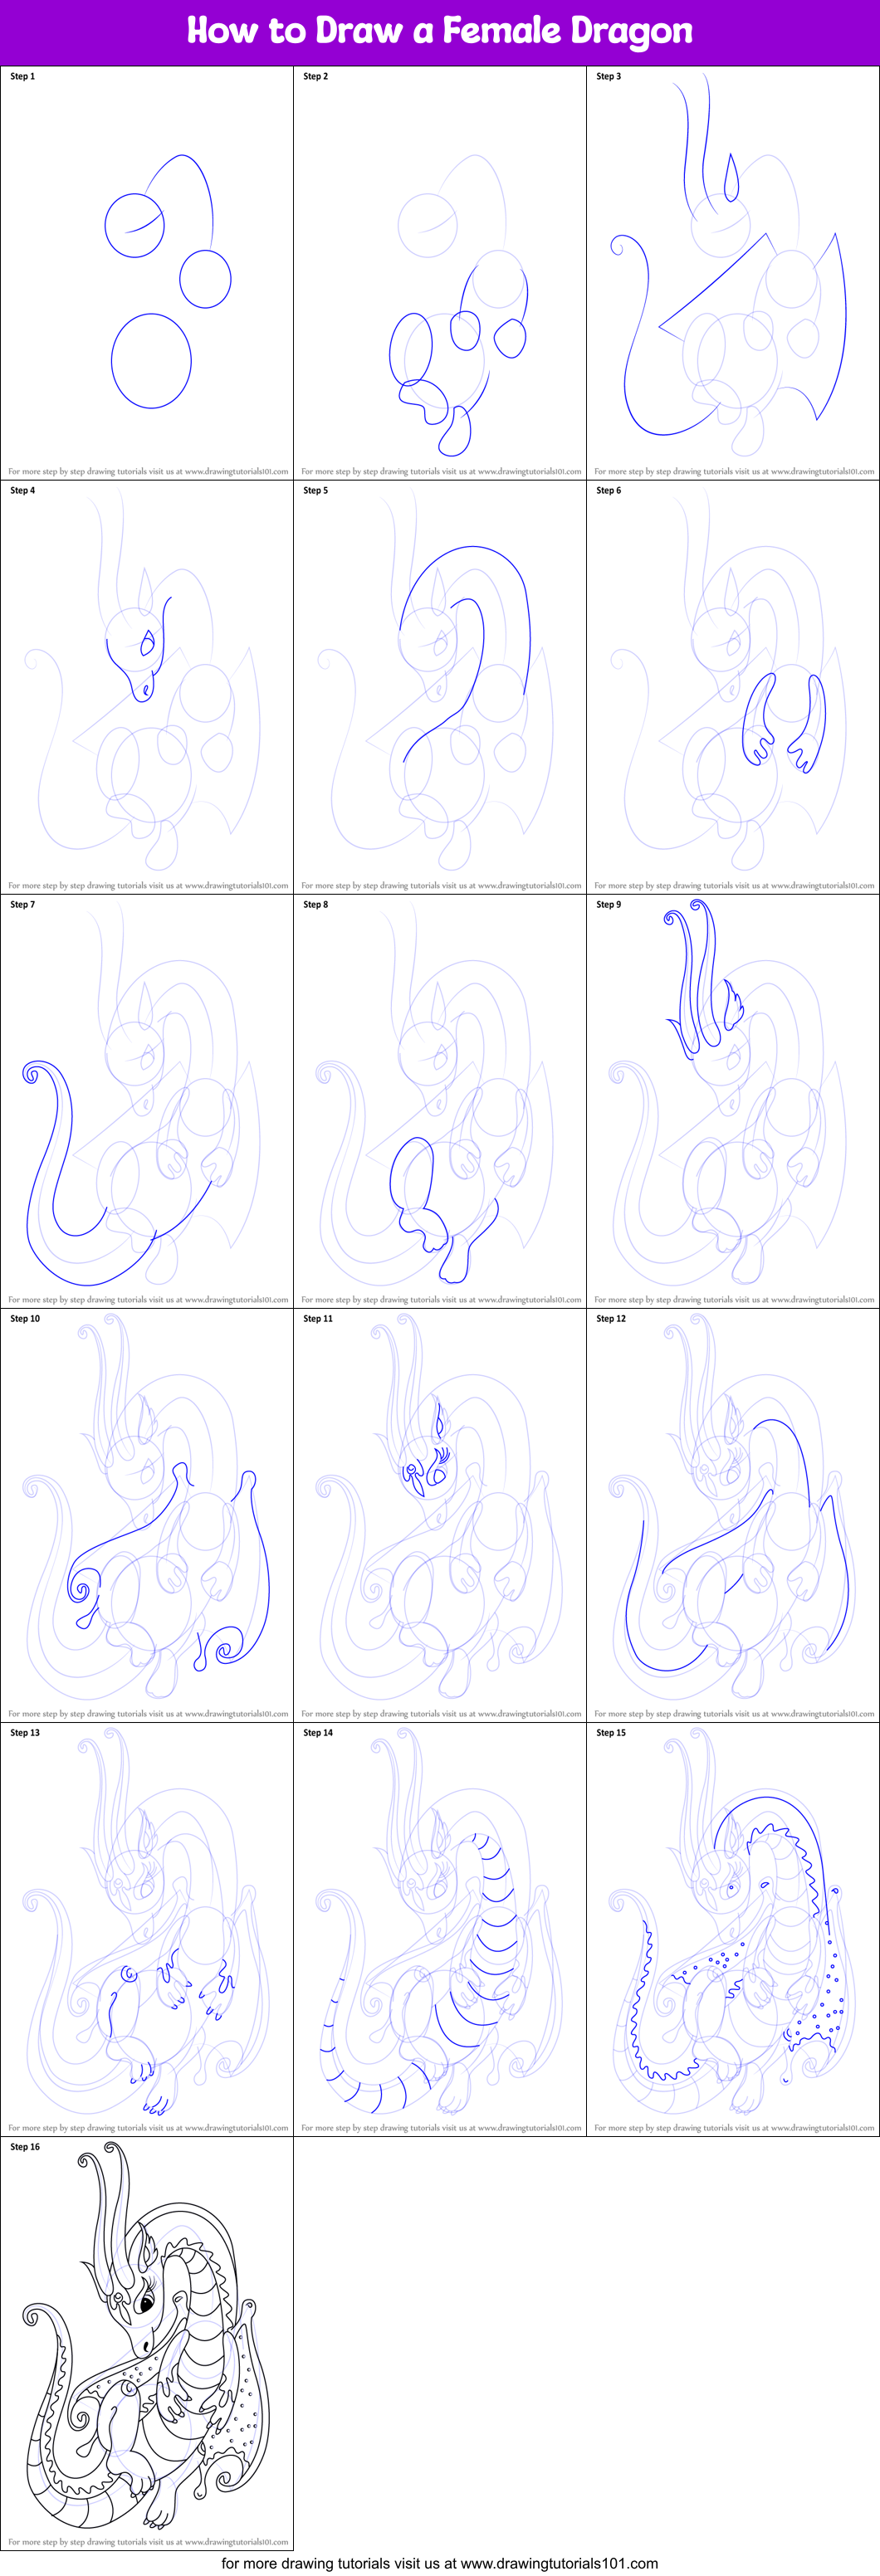 Step by step on How to draw a female dragon